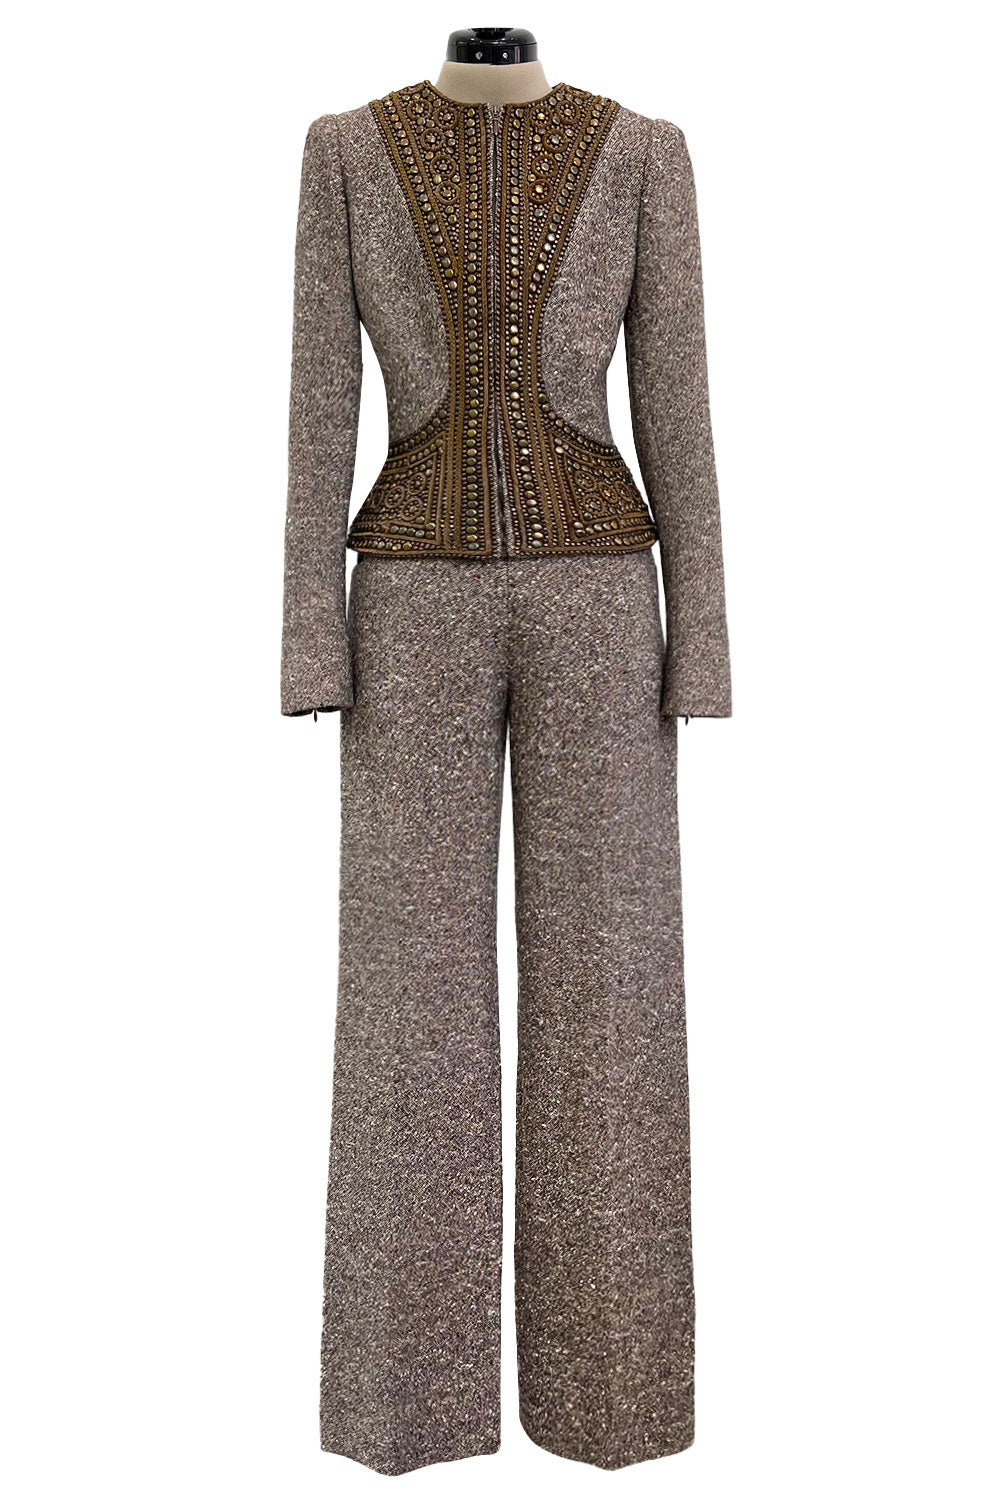 Documented & Rare Fall 2004 Alexander McQueen Tweed Pant Suit w